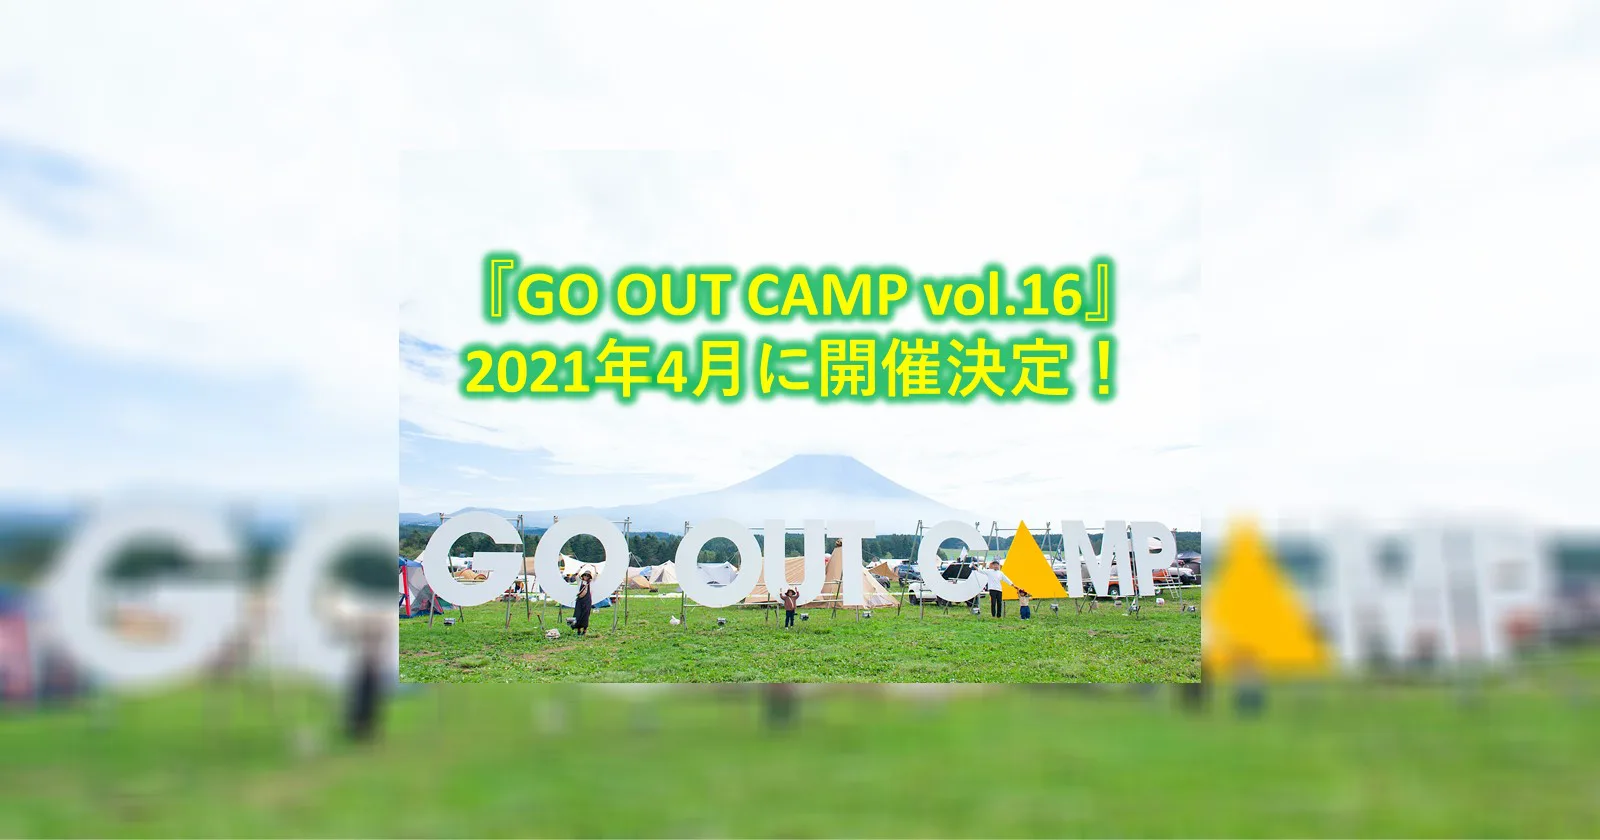 『GO OUT CAMP vol.16』2021年4月に開催決定！ | キャンプ 